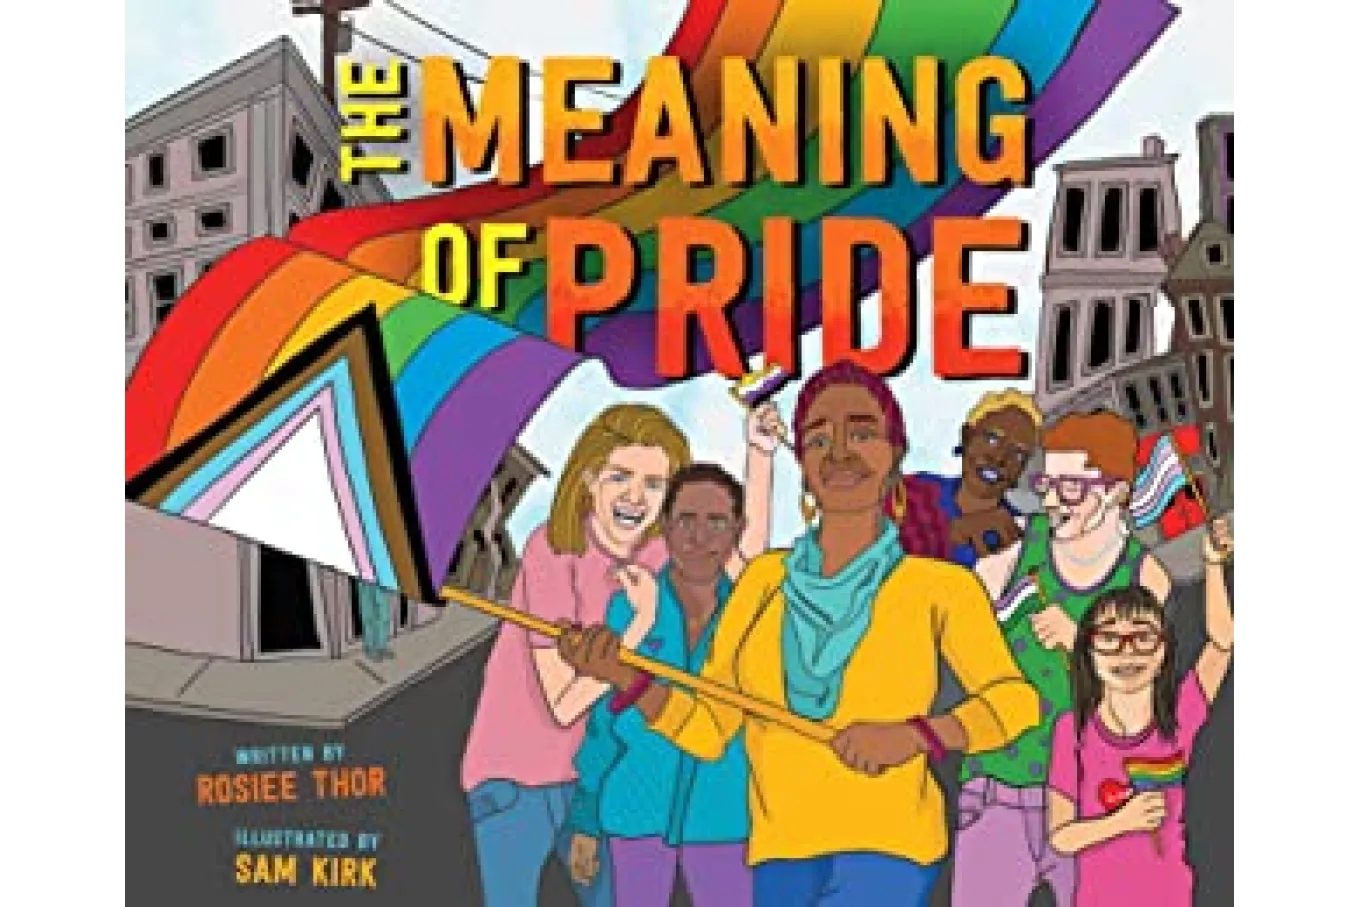 The Cover of The Meaning of Pride